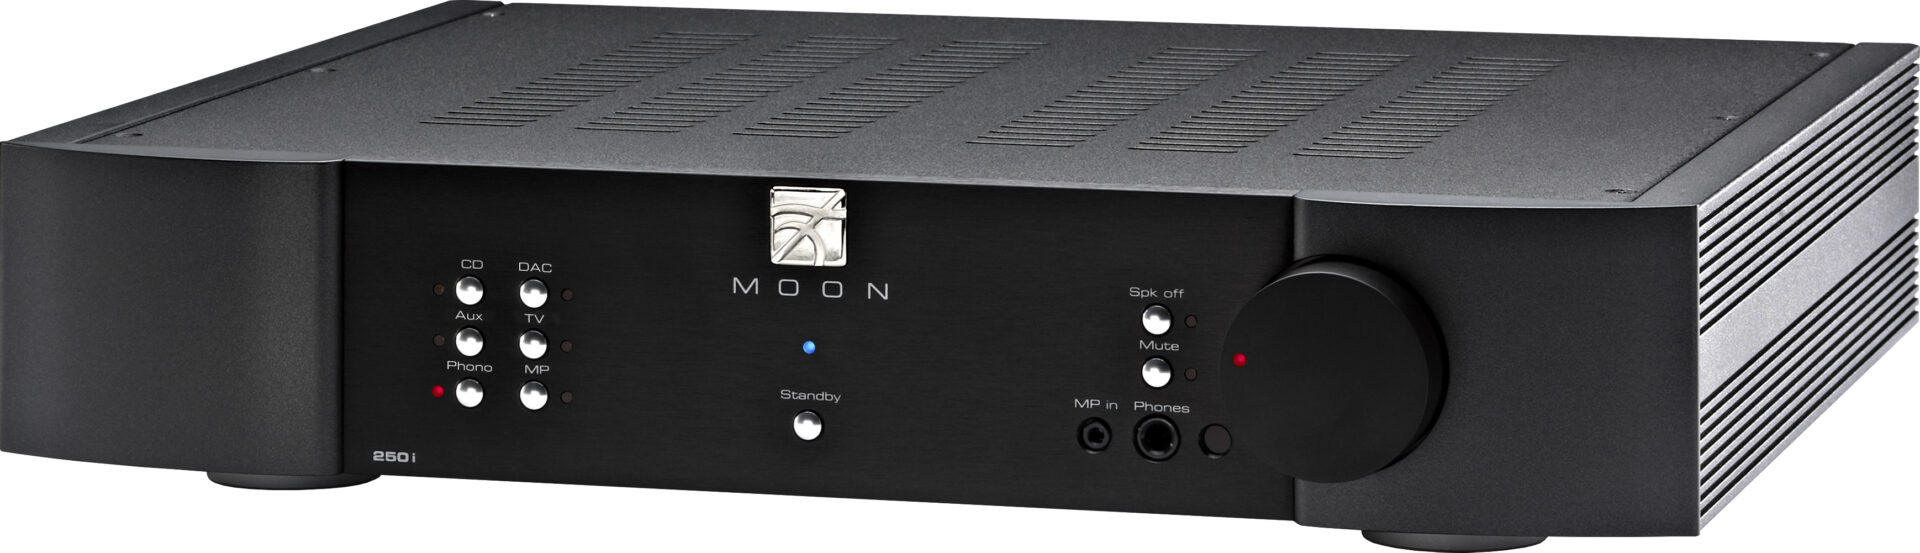 MOON Launches 250i V2 Integrated Amplifier